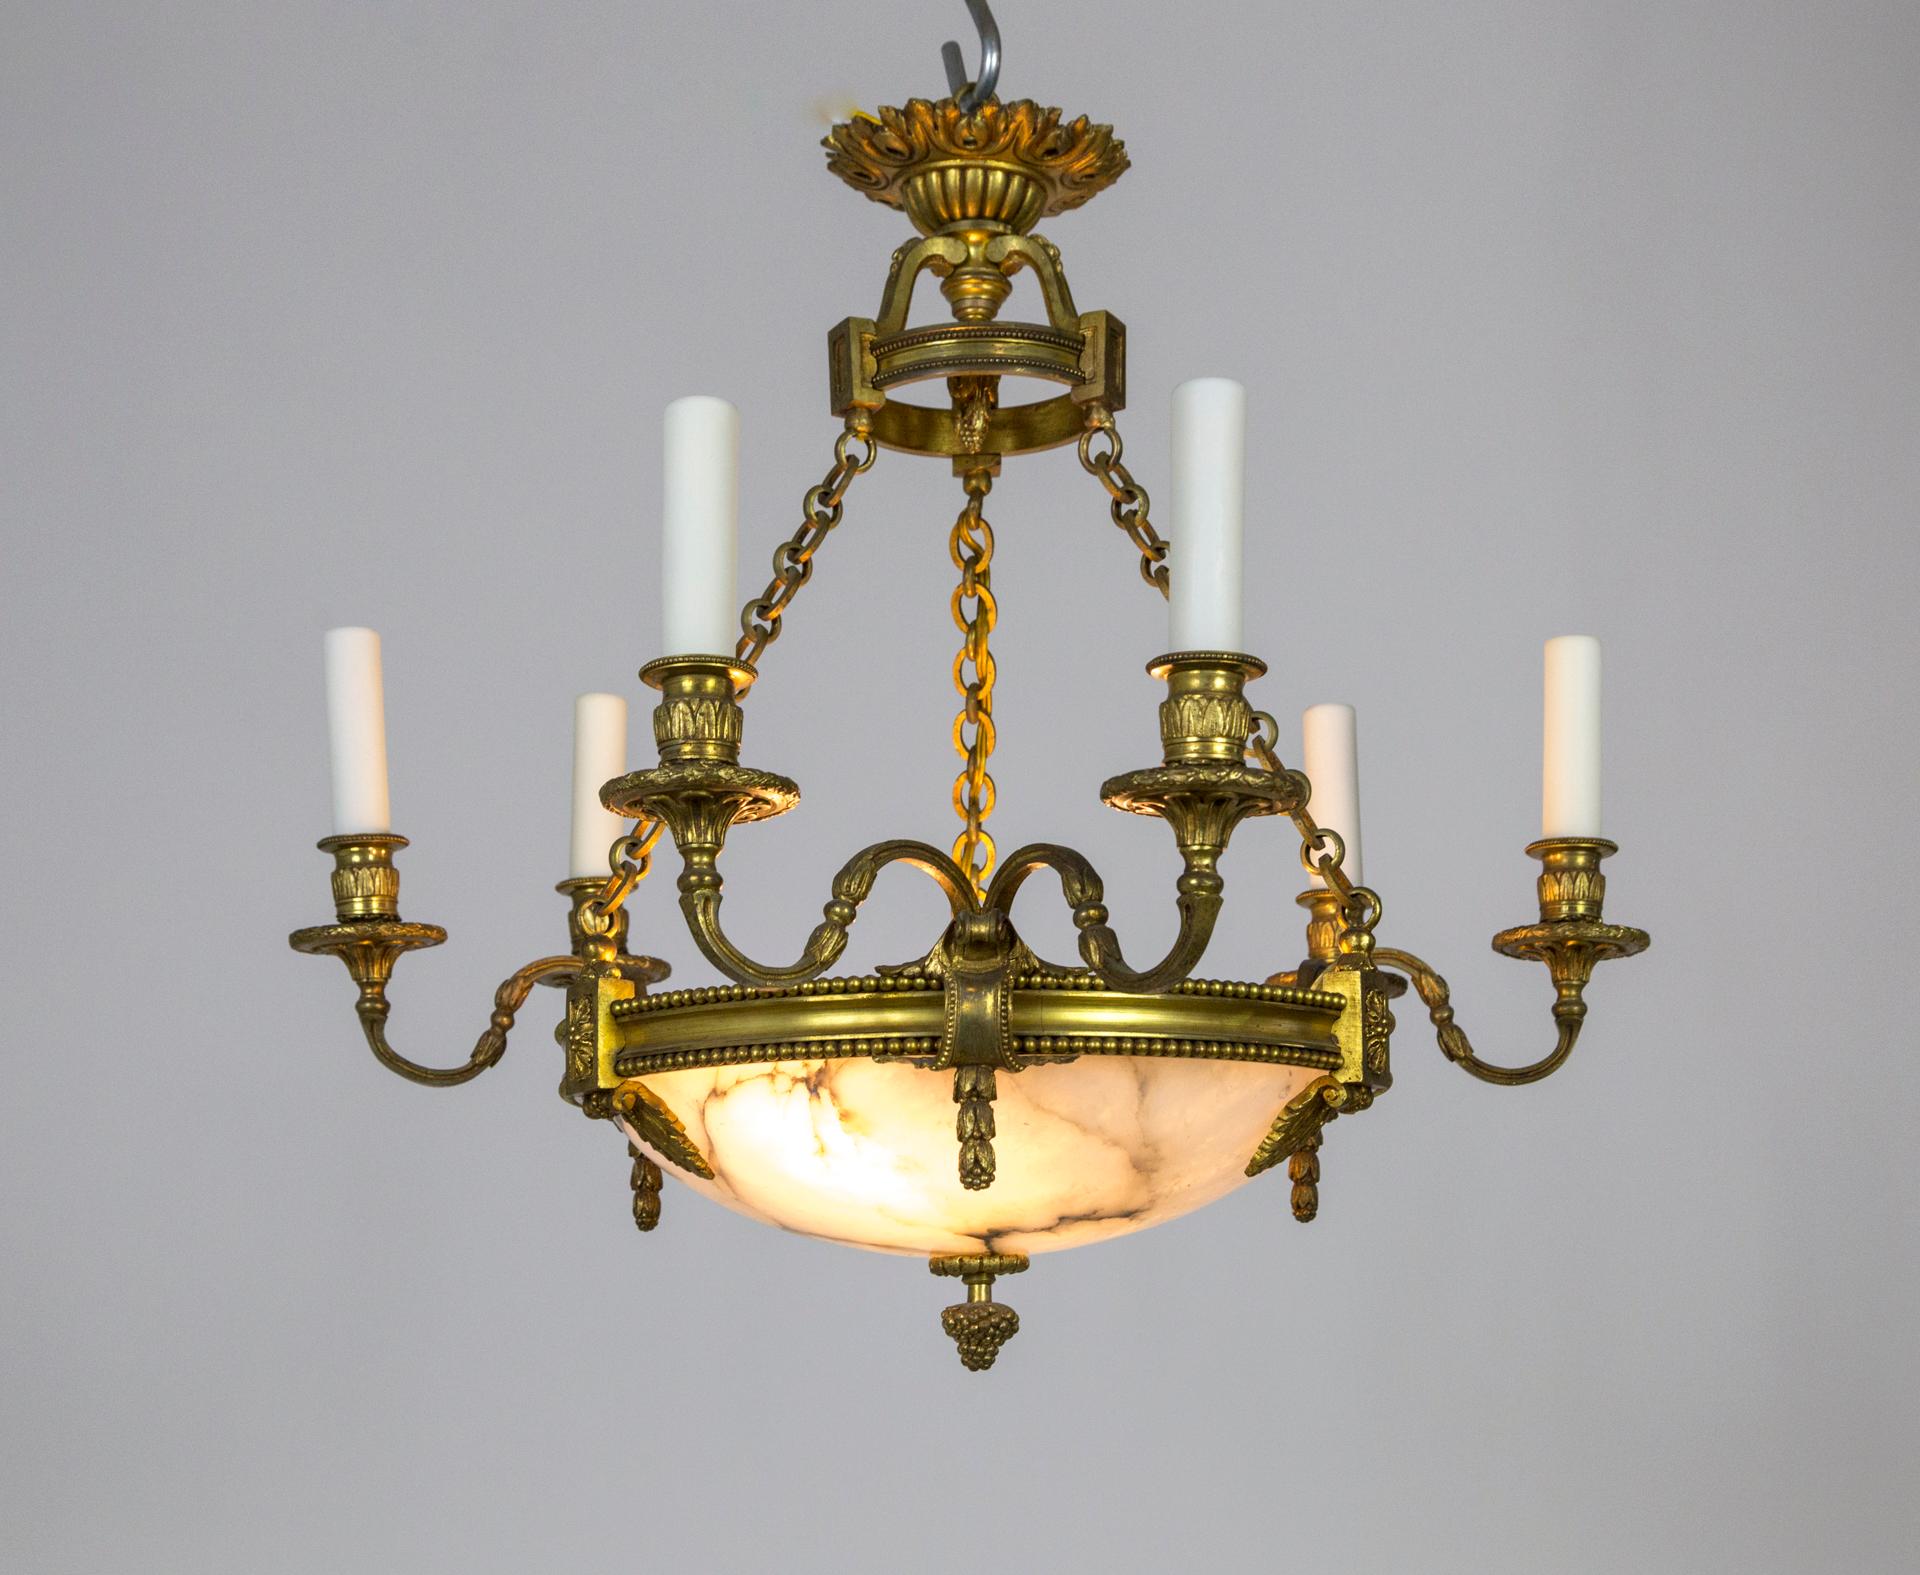 A neoclassical style, Belle Époque, gilt bronze chandelier with three twin arms (6 candlestick lights) extending from a center alabaster bowl; hanging from three chains and decorative canopy. Cast with extremely fine detailing, acanthus and lotus